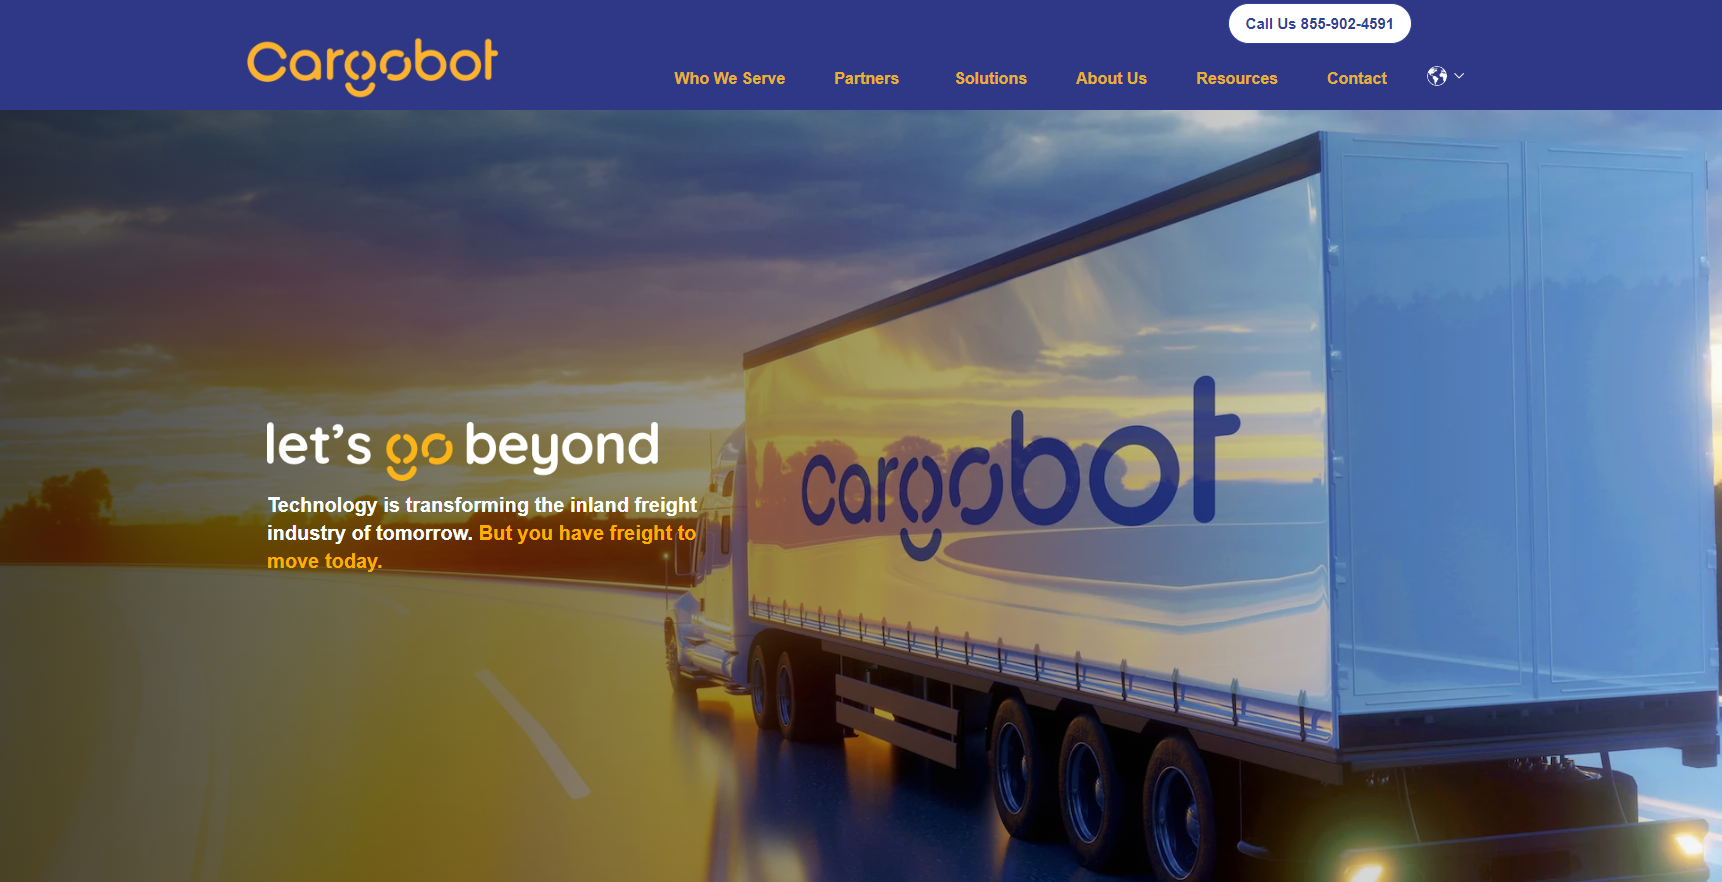 Cargobot, the innovative startup transforming the truck transportation industry and has raised an impressive $17.5M in Series A funding.